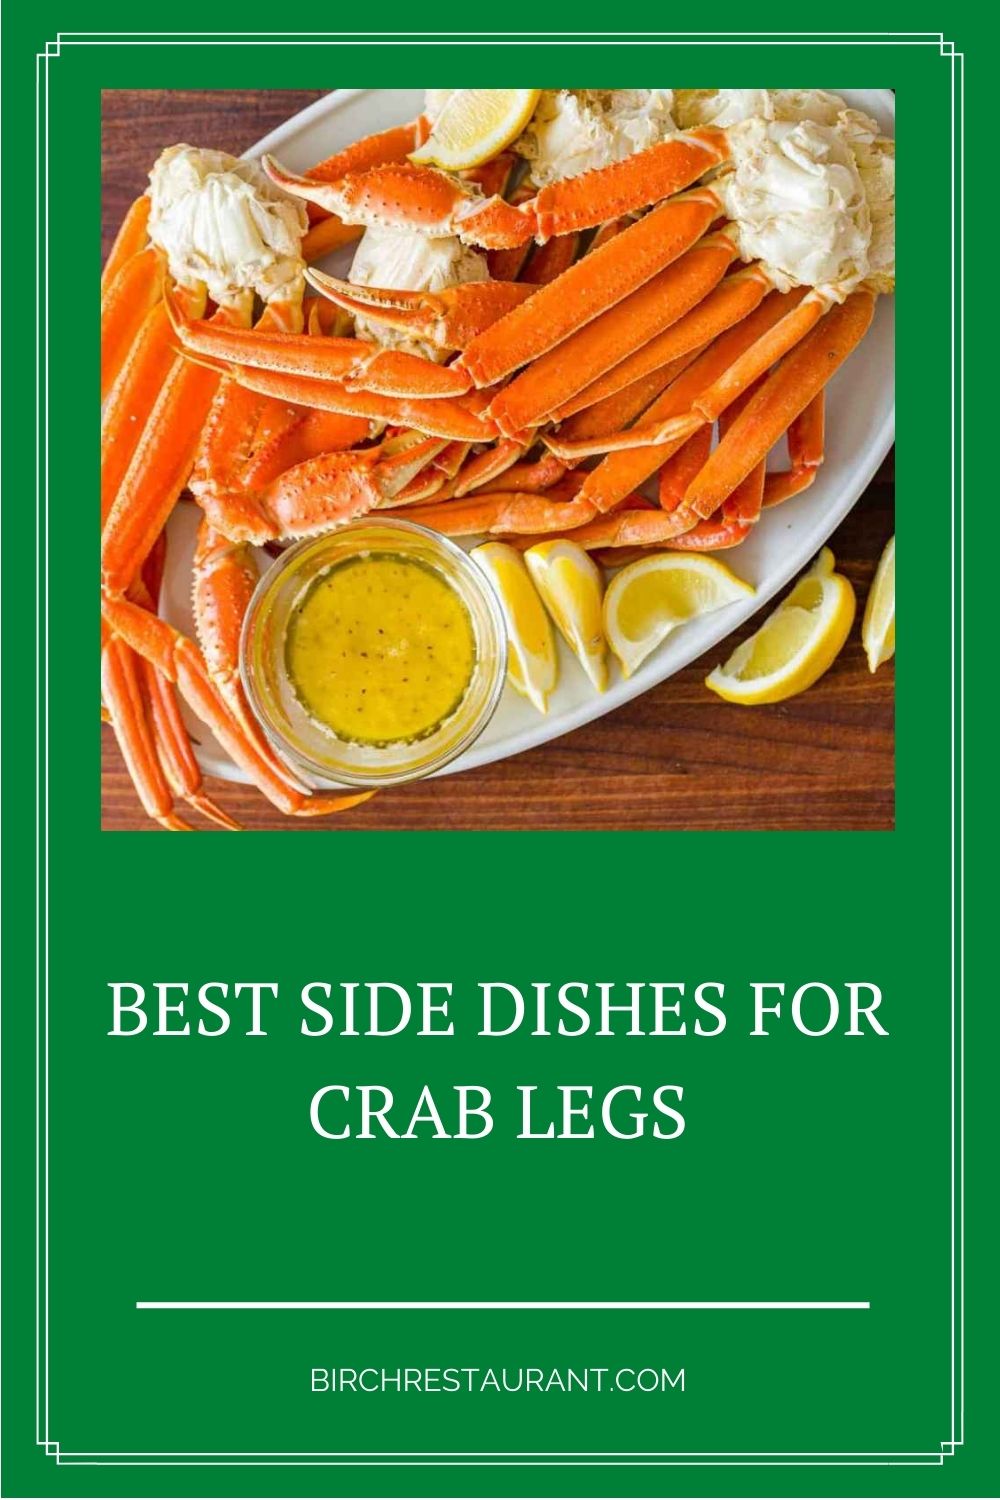 Best Side Dishes for Crab Legs